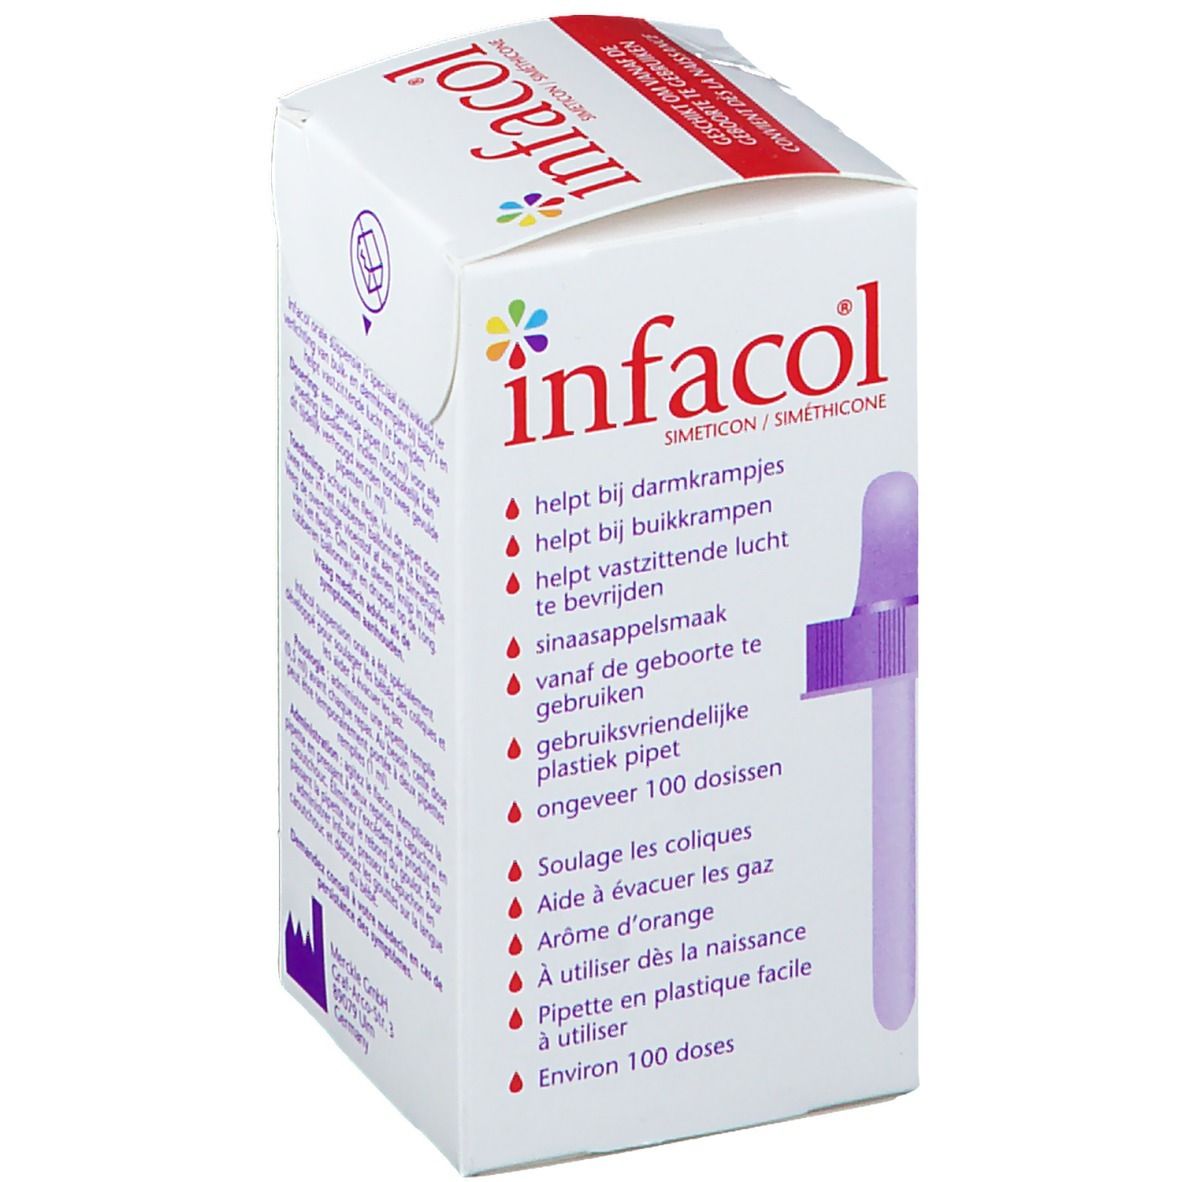 Infacol